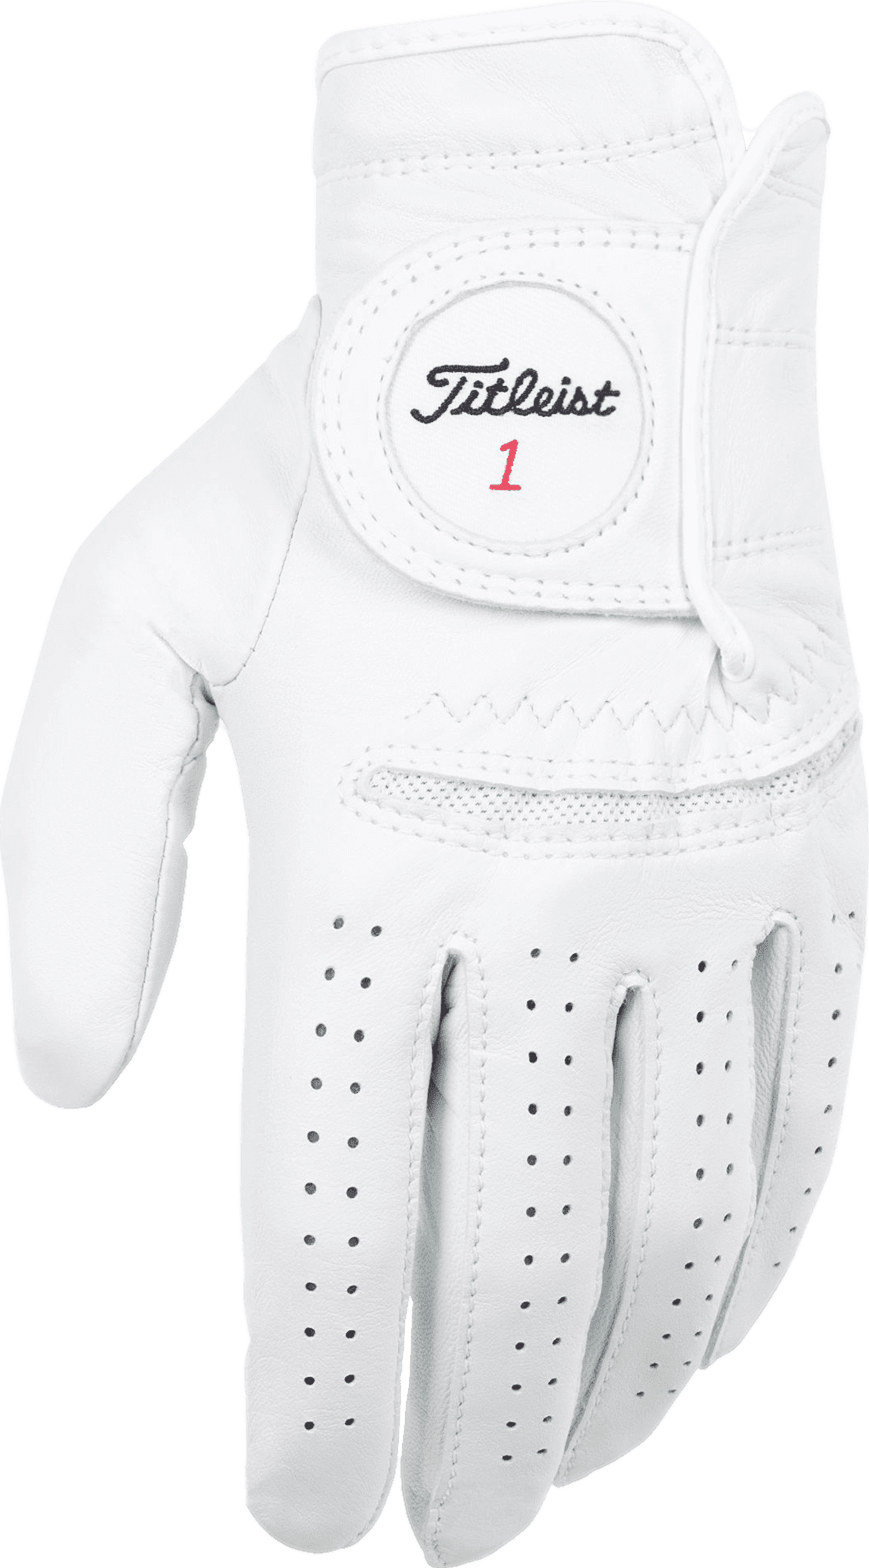 Titleist · Men's Perma-Soft Golf Gloves · Right Hand · L · Pearl